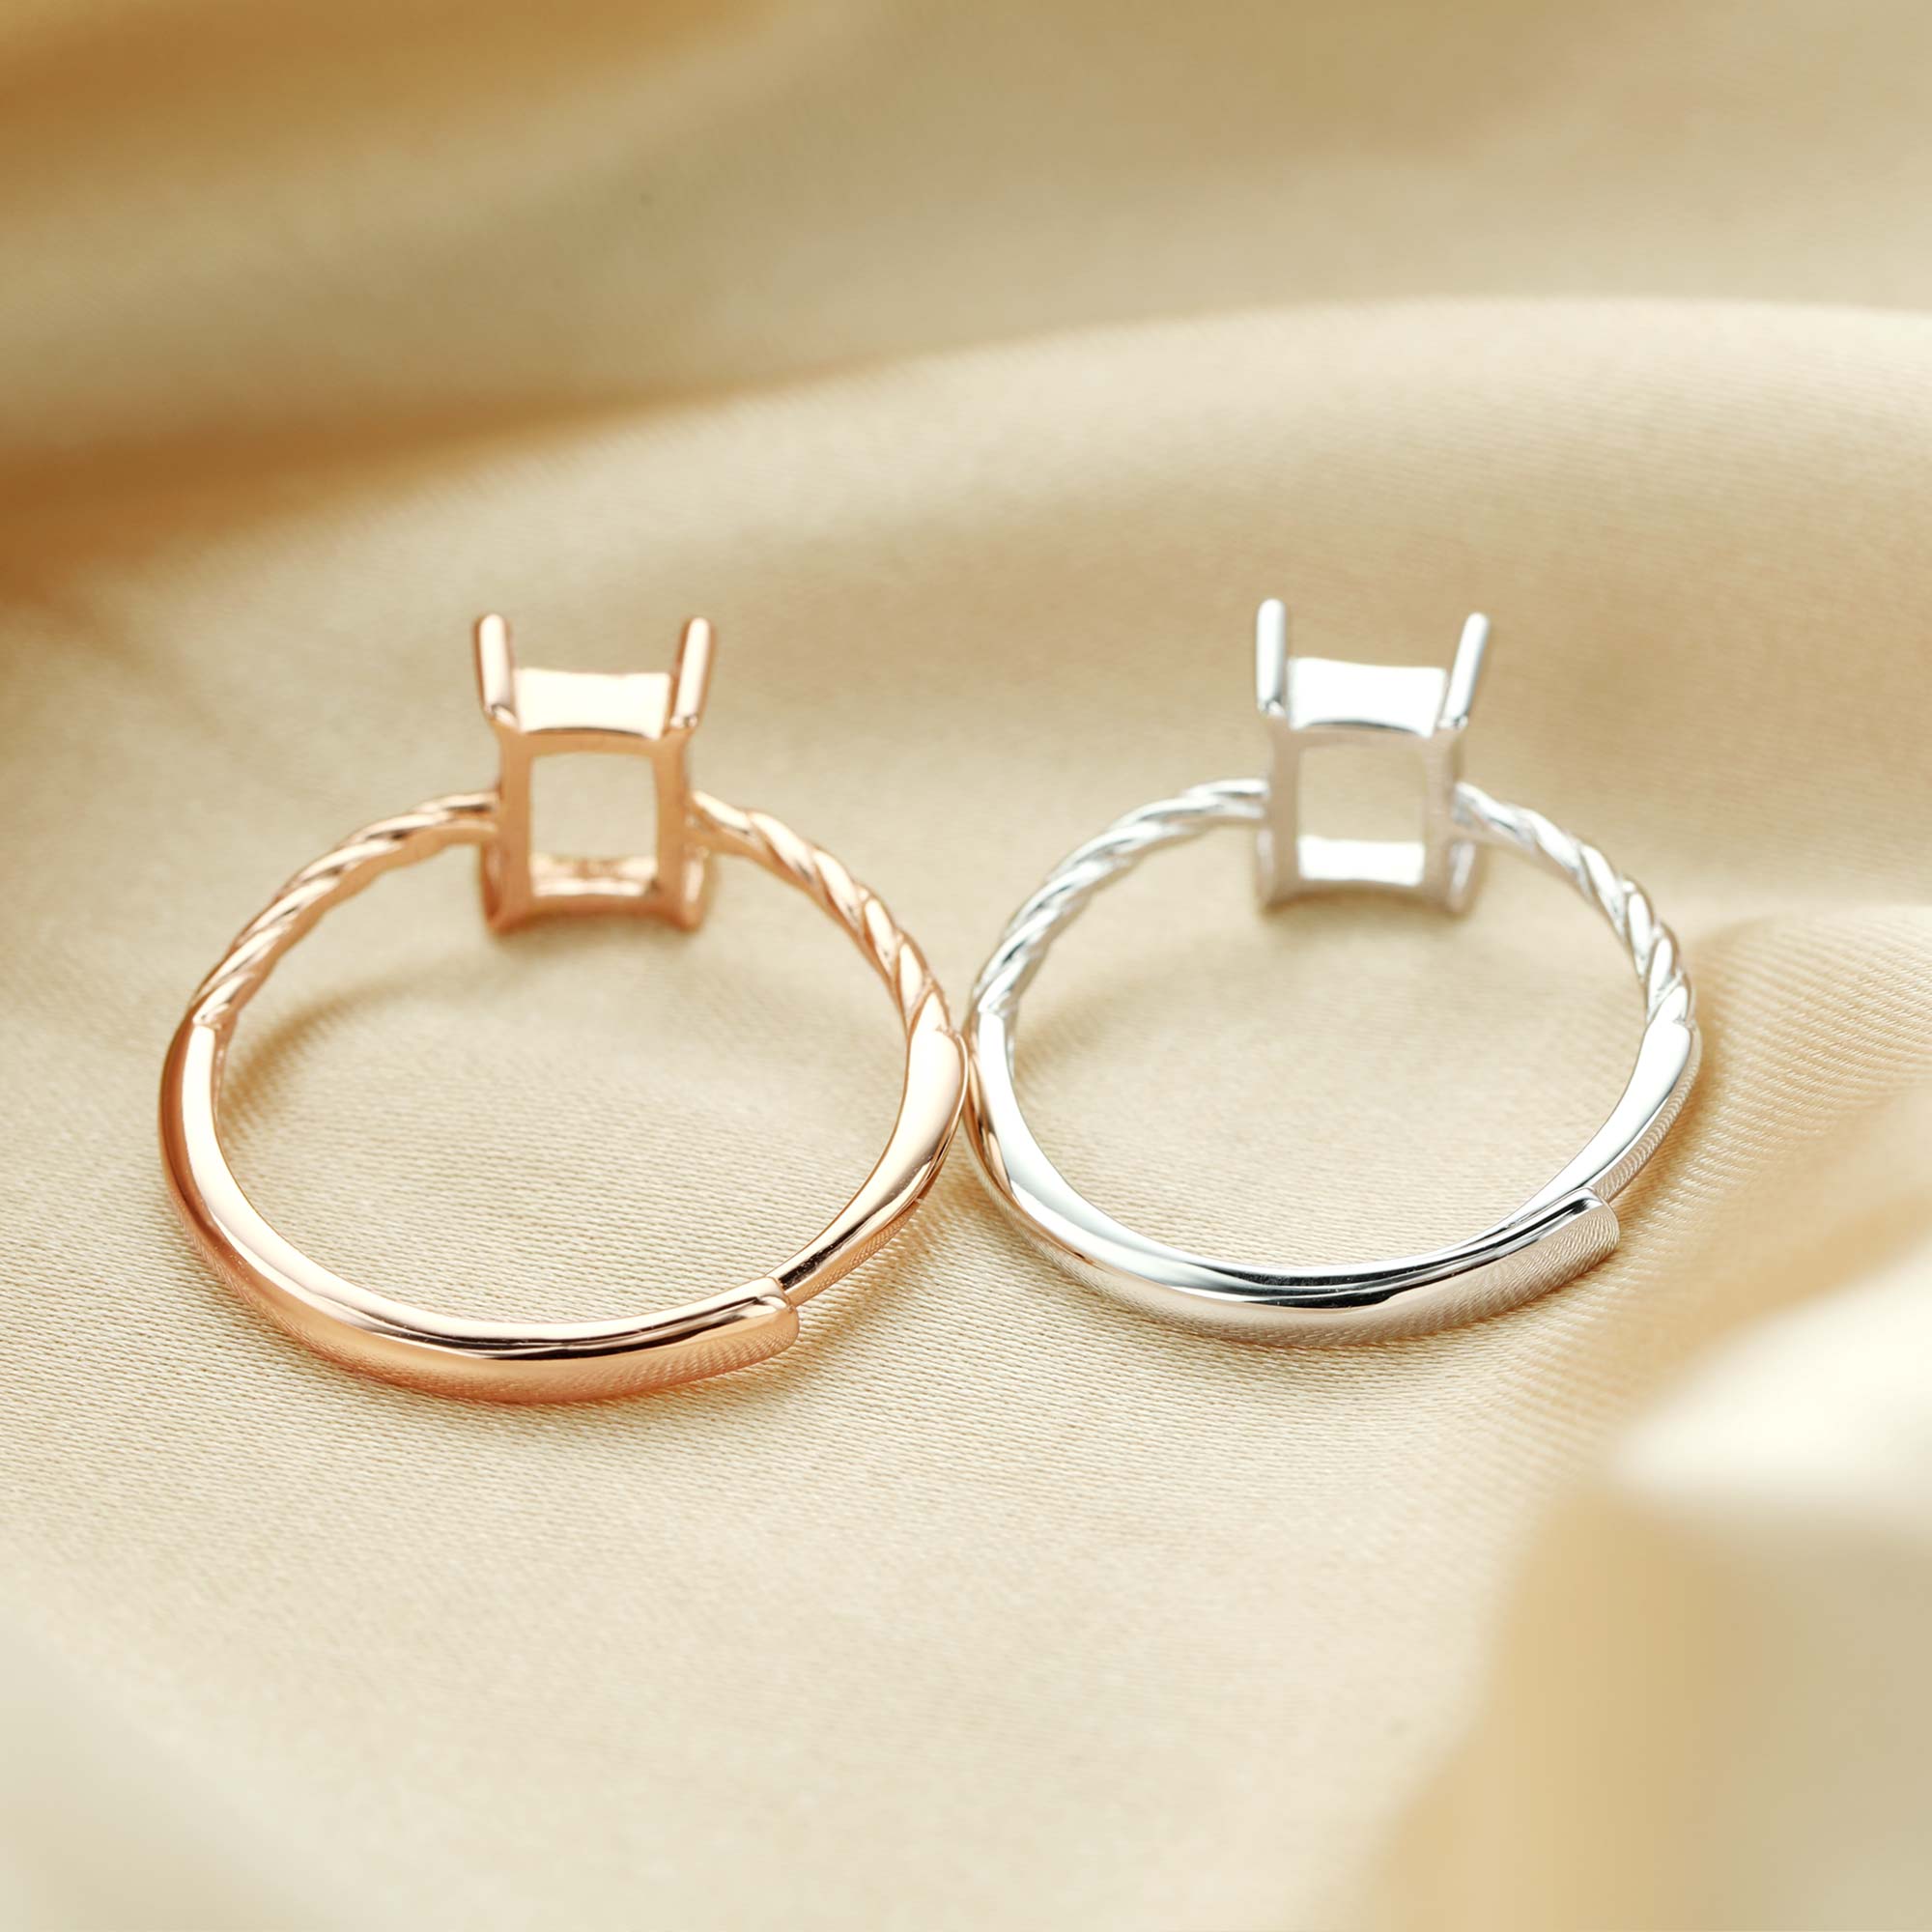 1Pcs 5x7MM Rectangle Prong Ring Settings Blank Rose Gold Plated Solid 925 Sterling Silver DIY Bezel Tray for Gemstone 1294201 - Click Image to Close